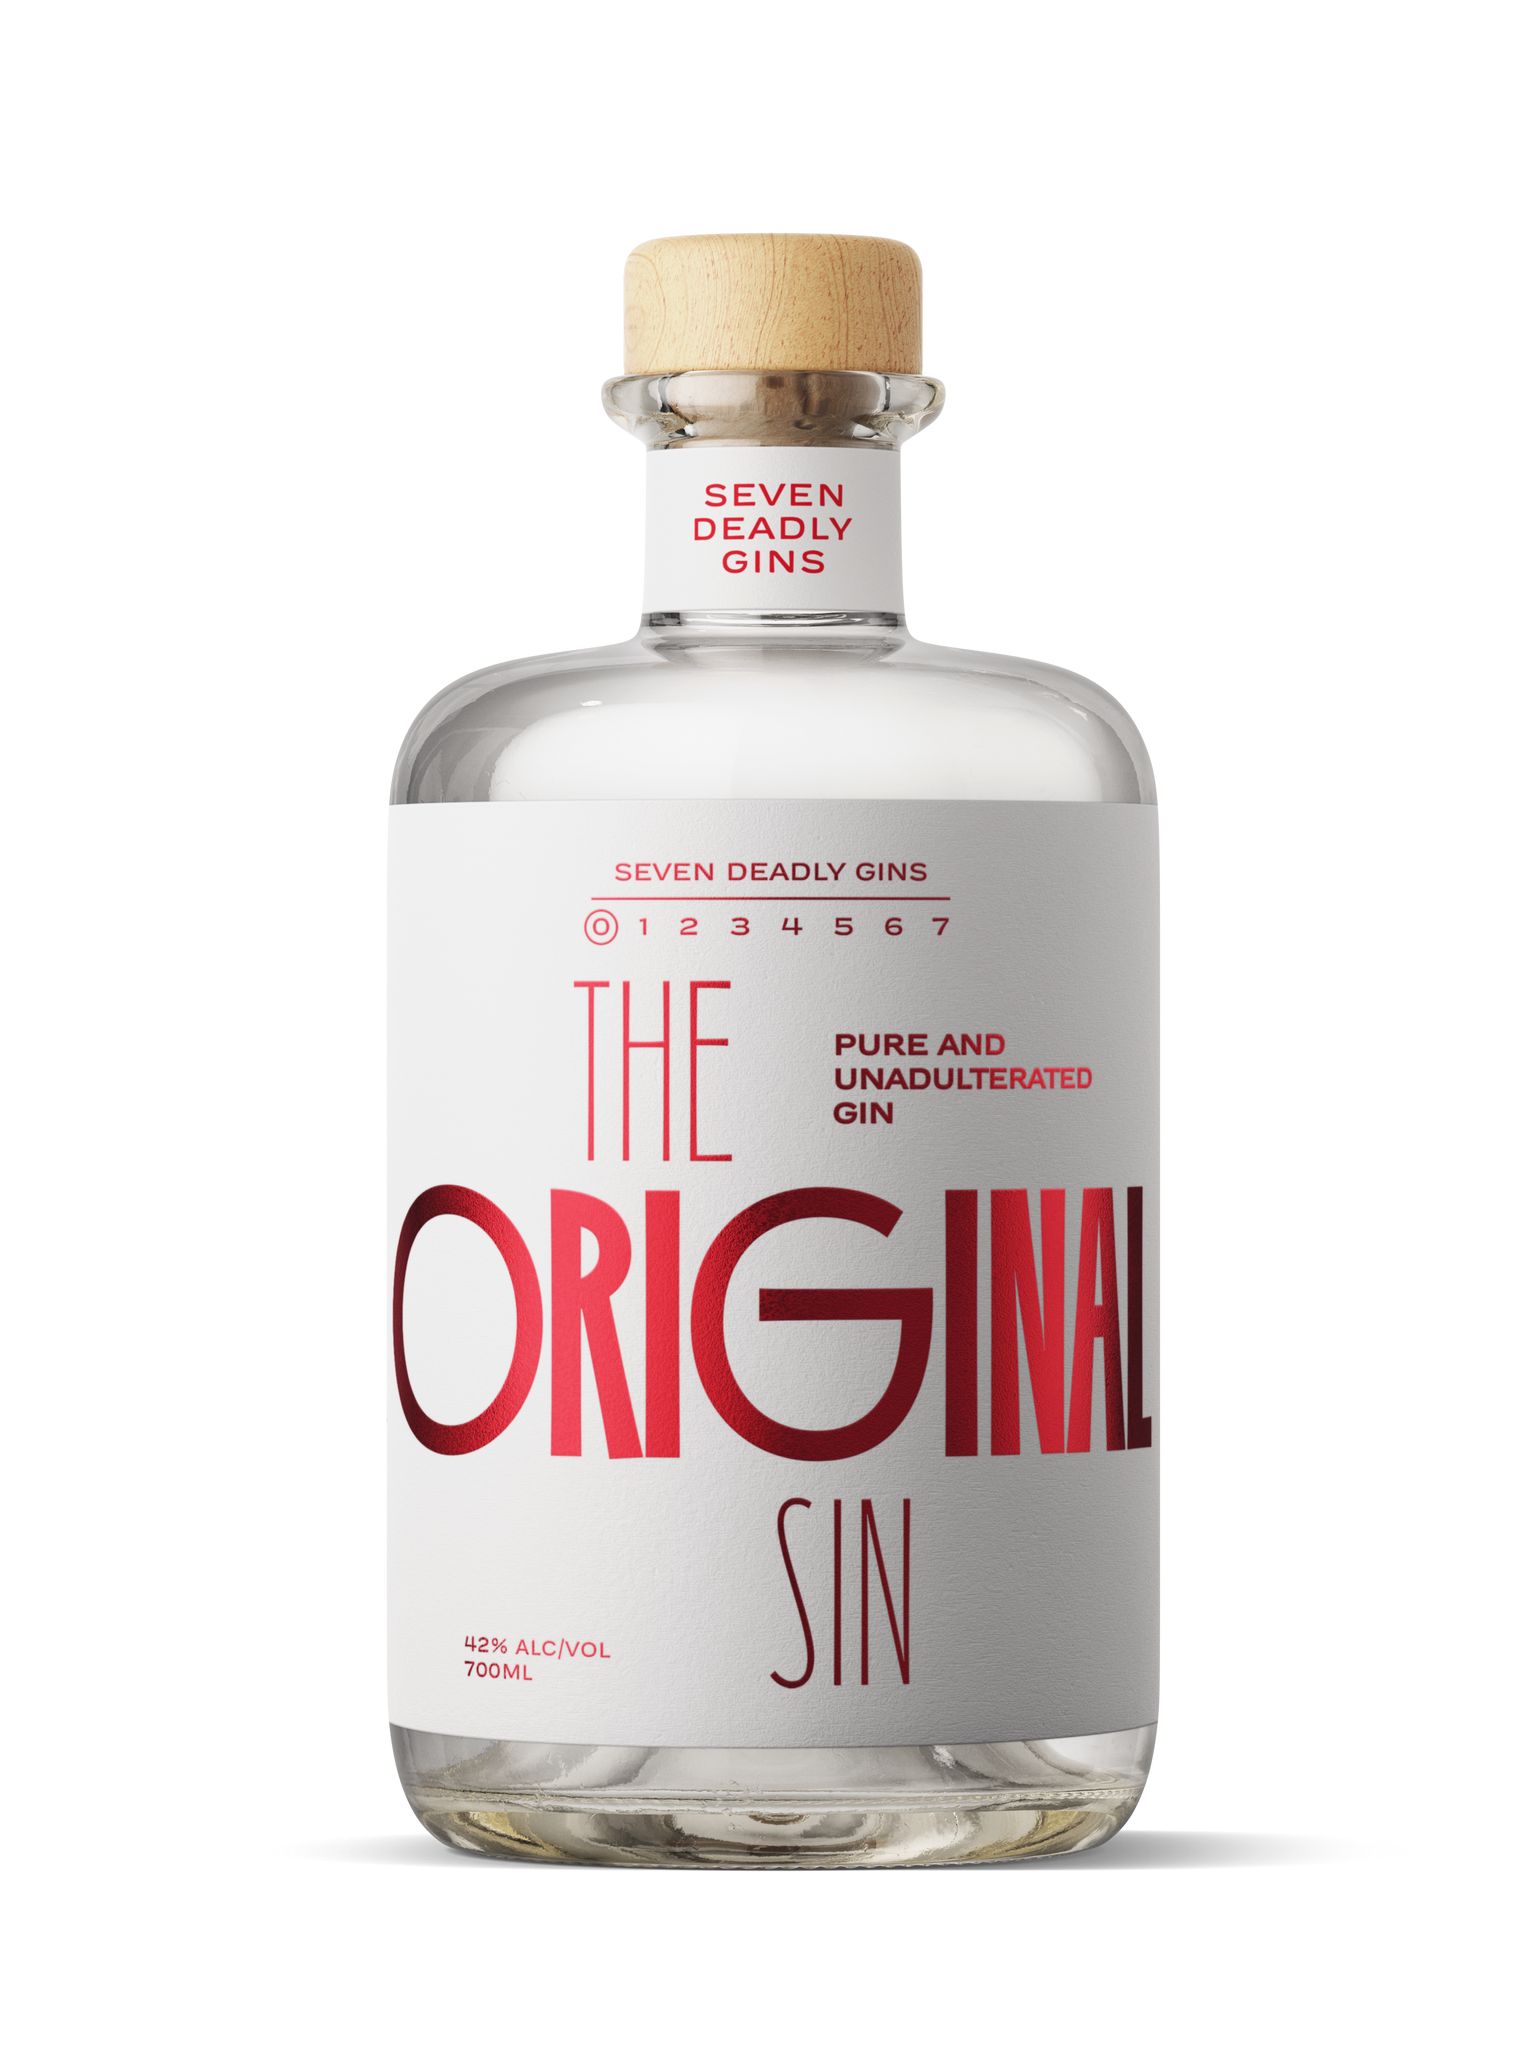 A red and white bottle of Original Sin gin